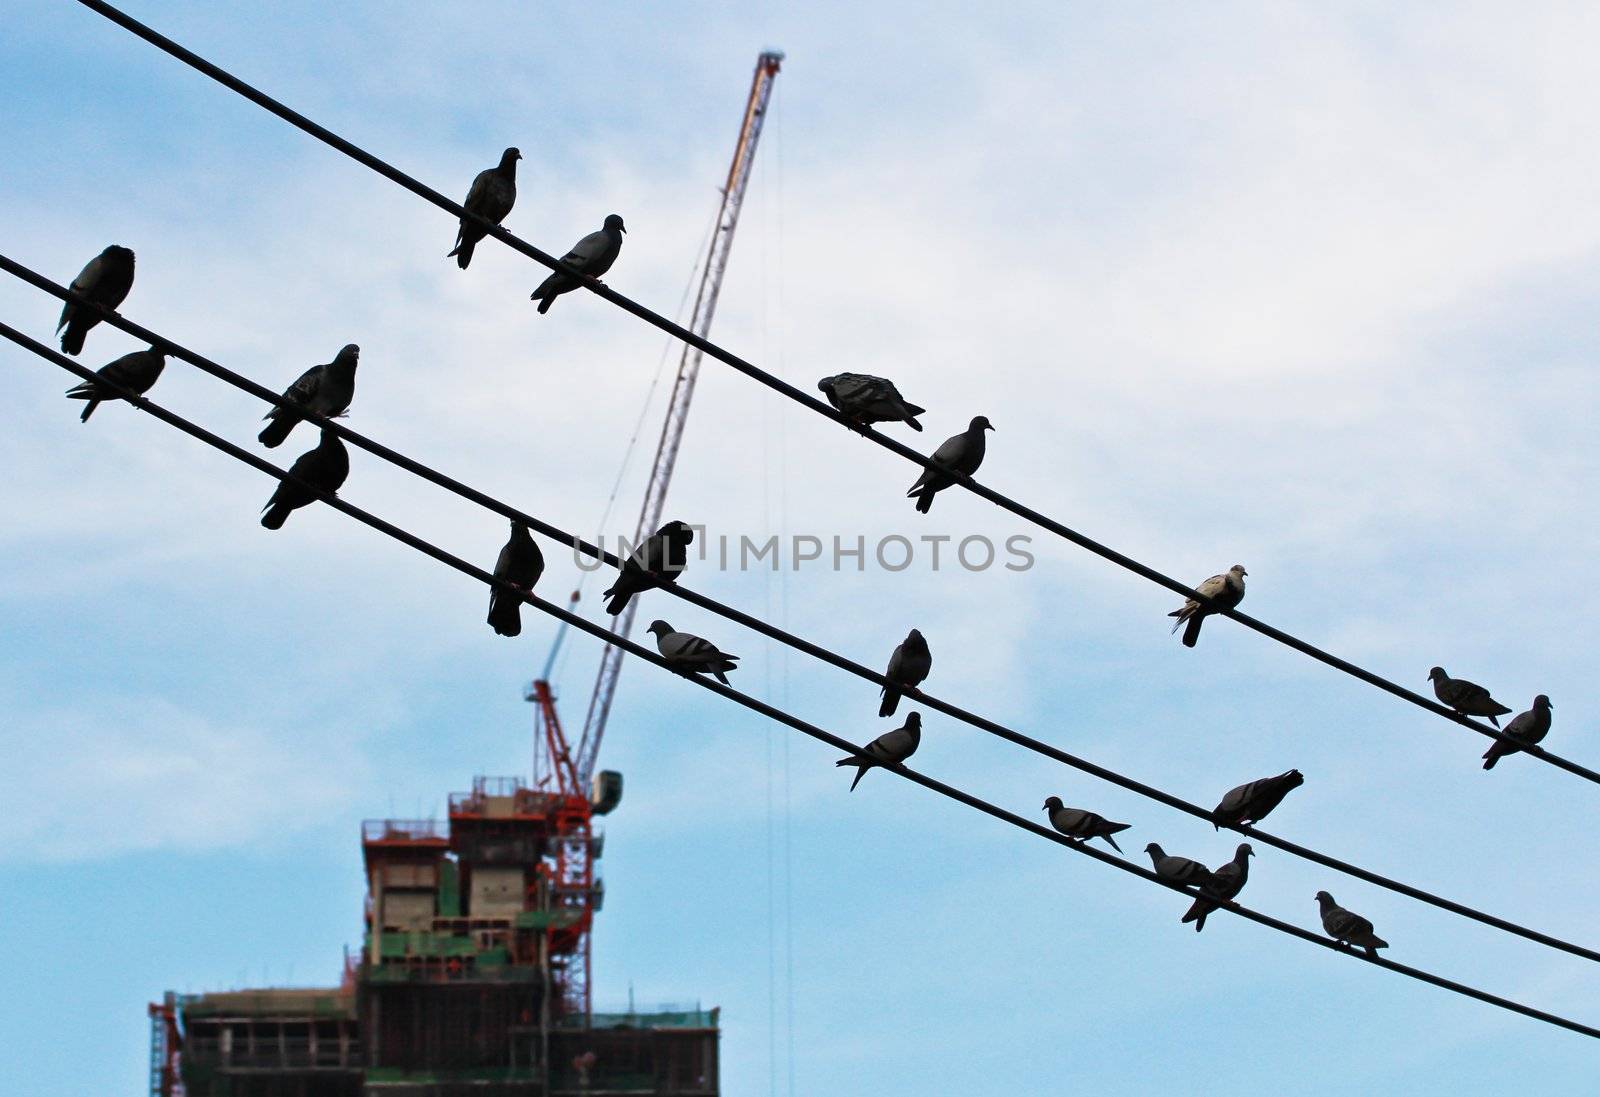 Pigeon on the cable by Myimagine